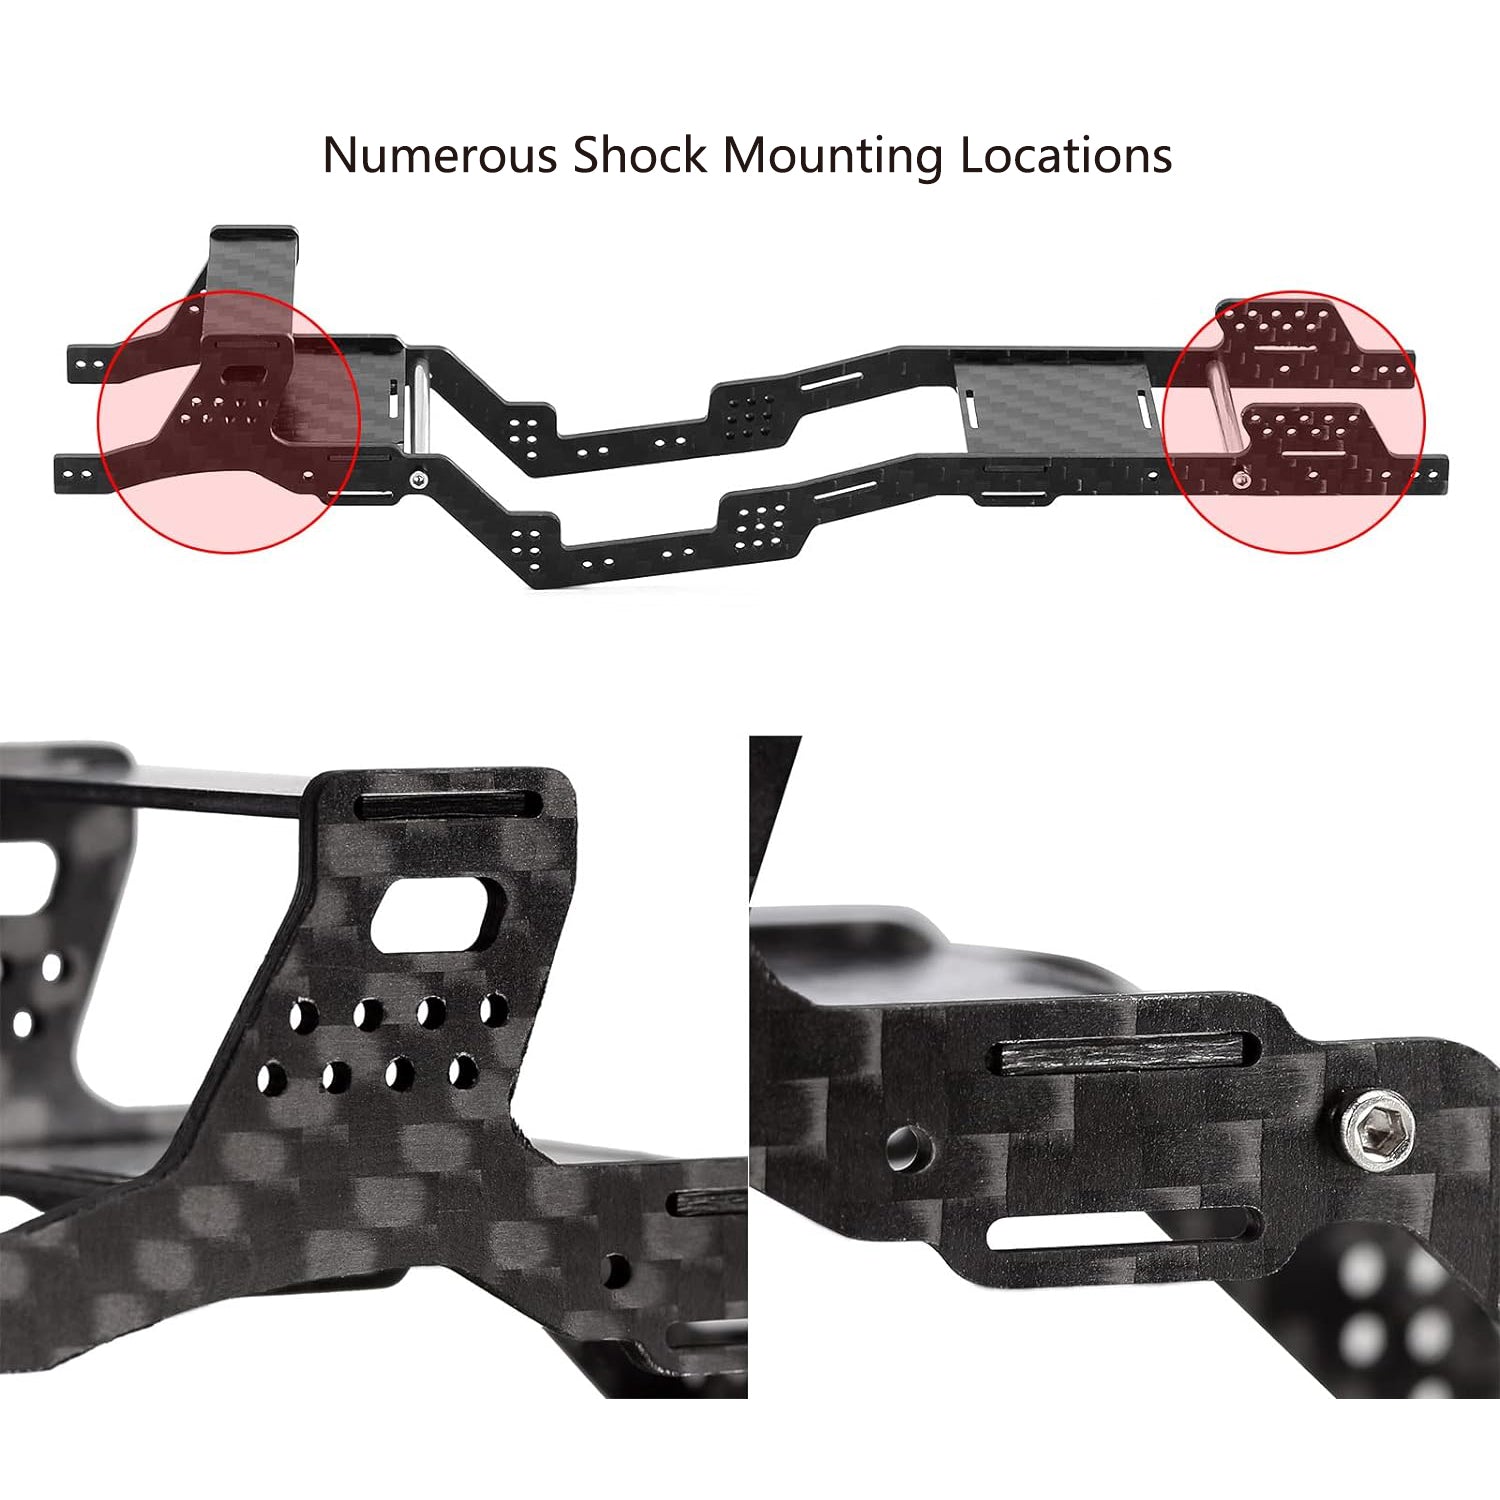 LCG Carbon Fiber Chassis with two shock mounting locations